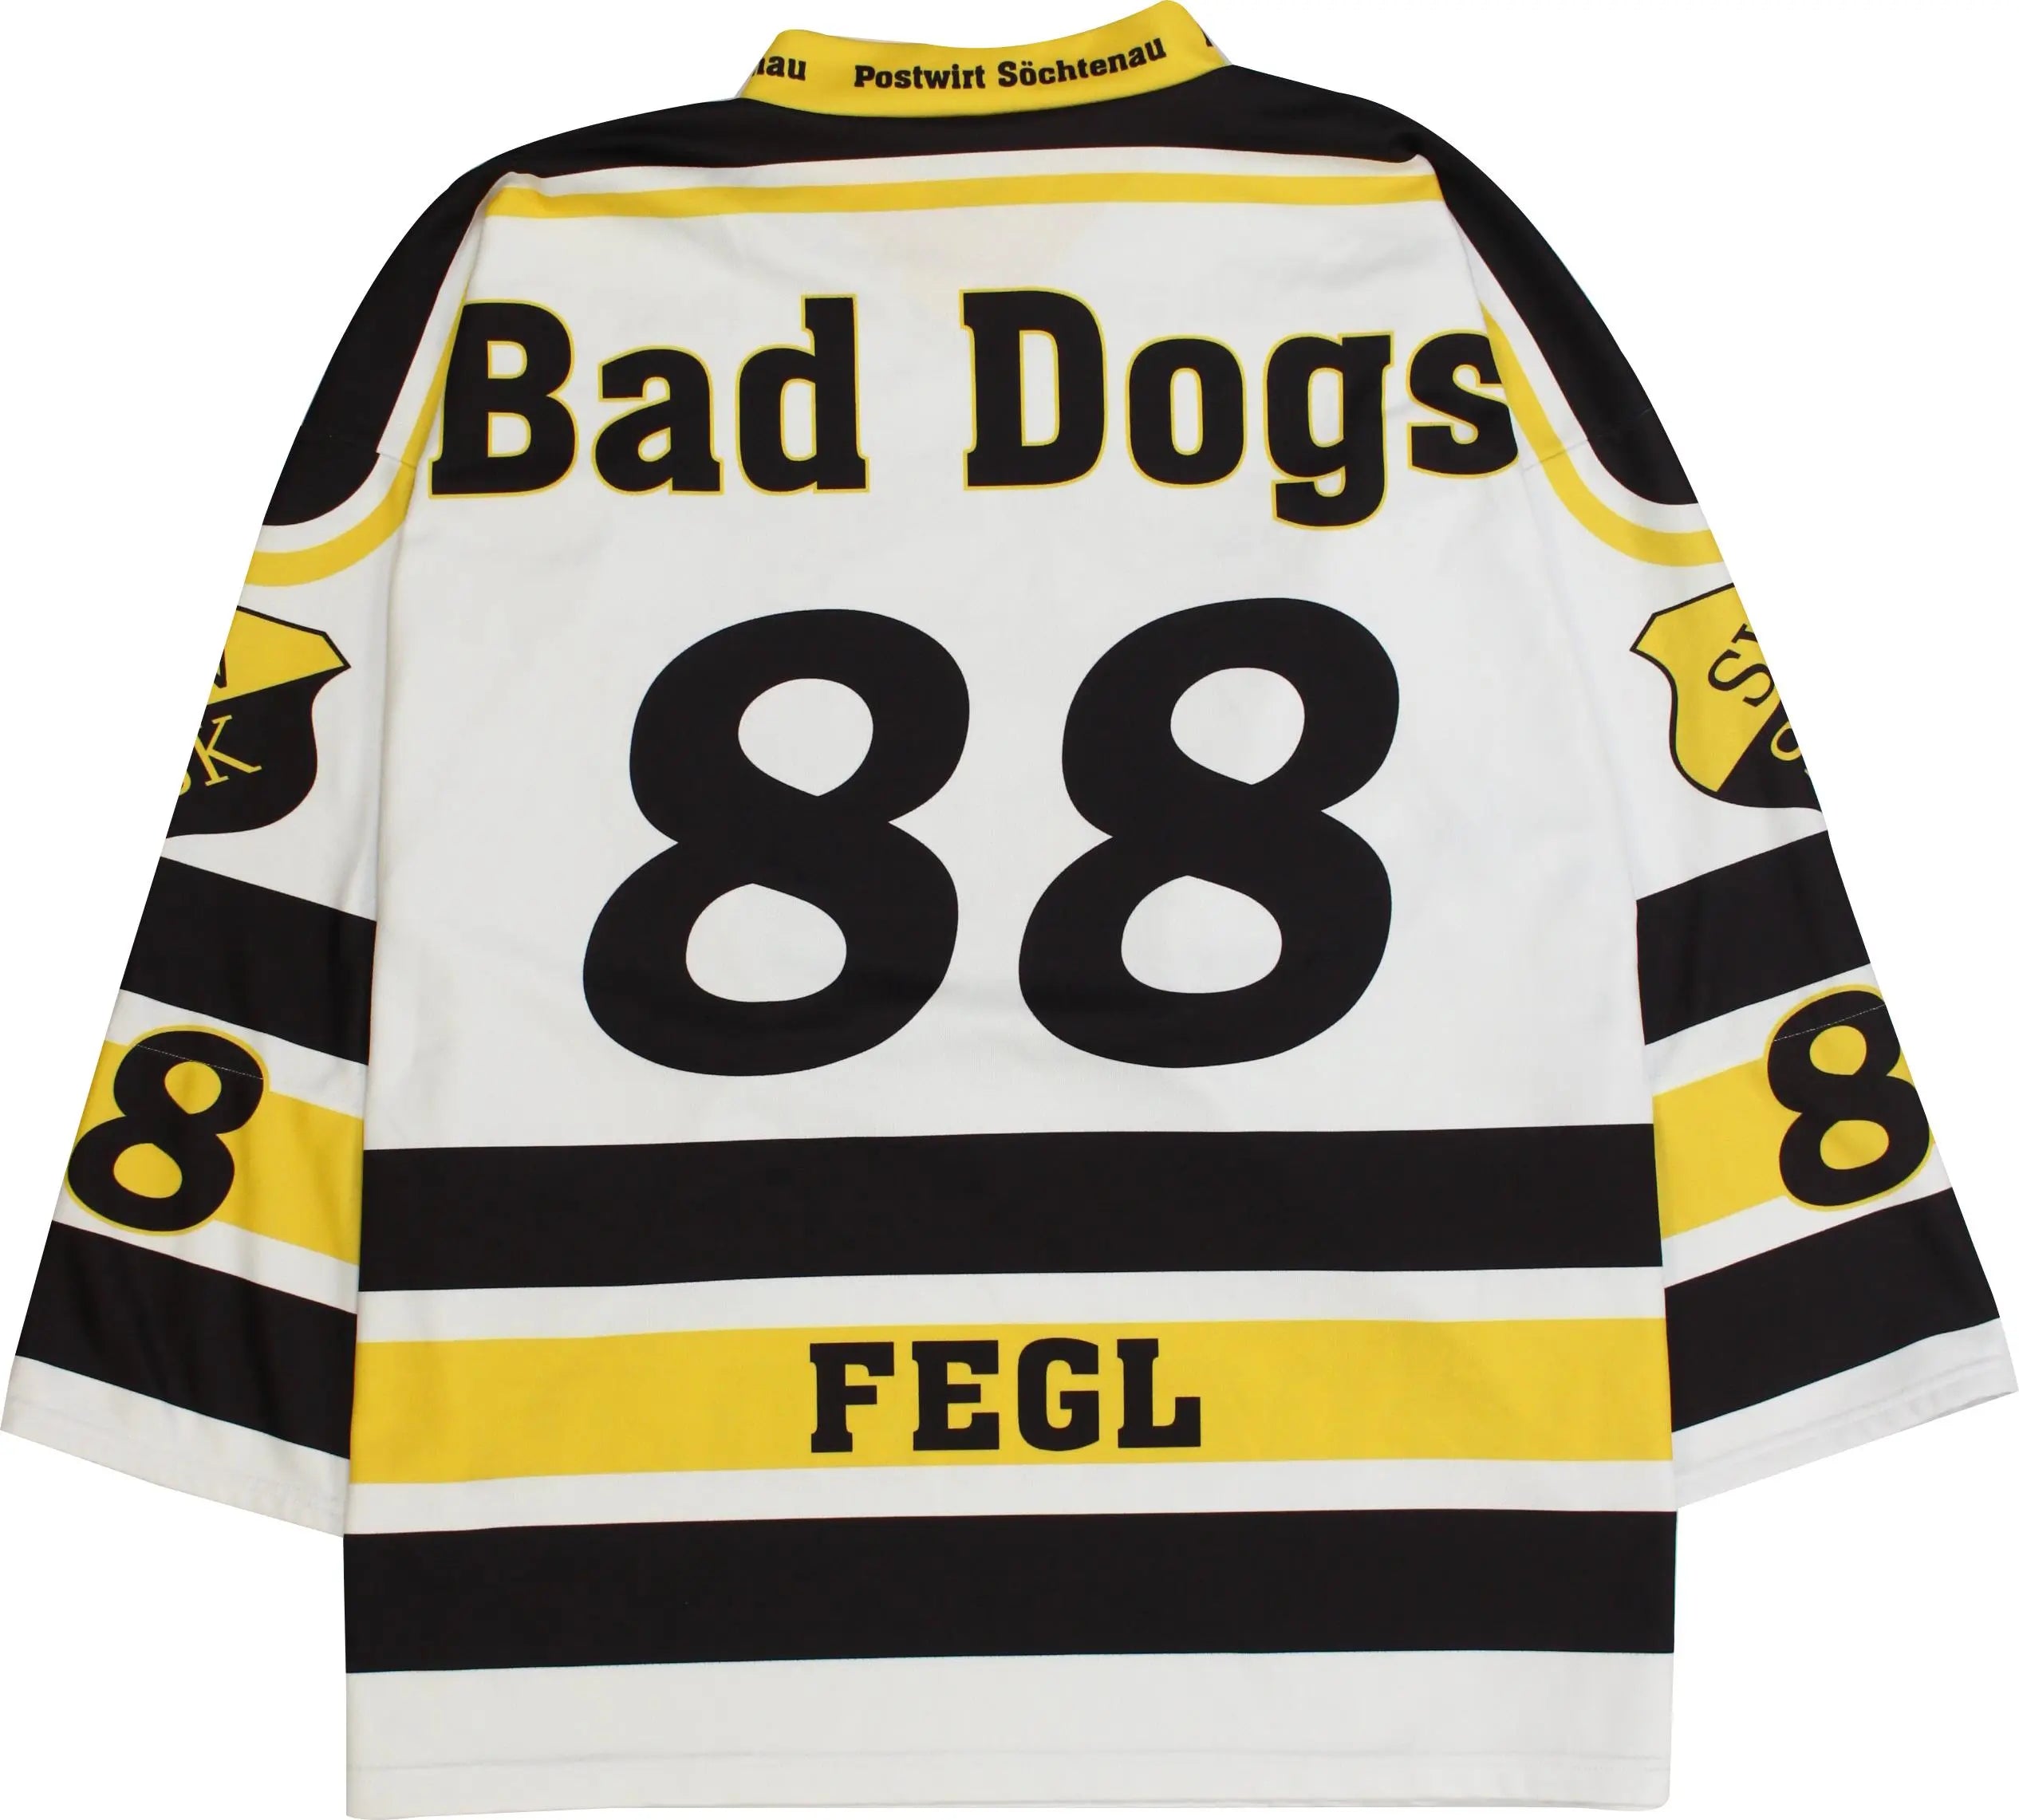 Unknown - 'Bad Boys' Söchtenau Shirt- ThriftTale.com - Vintage and second handclothing